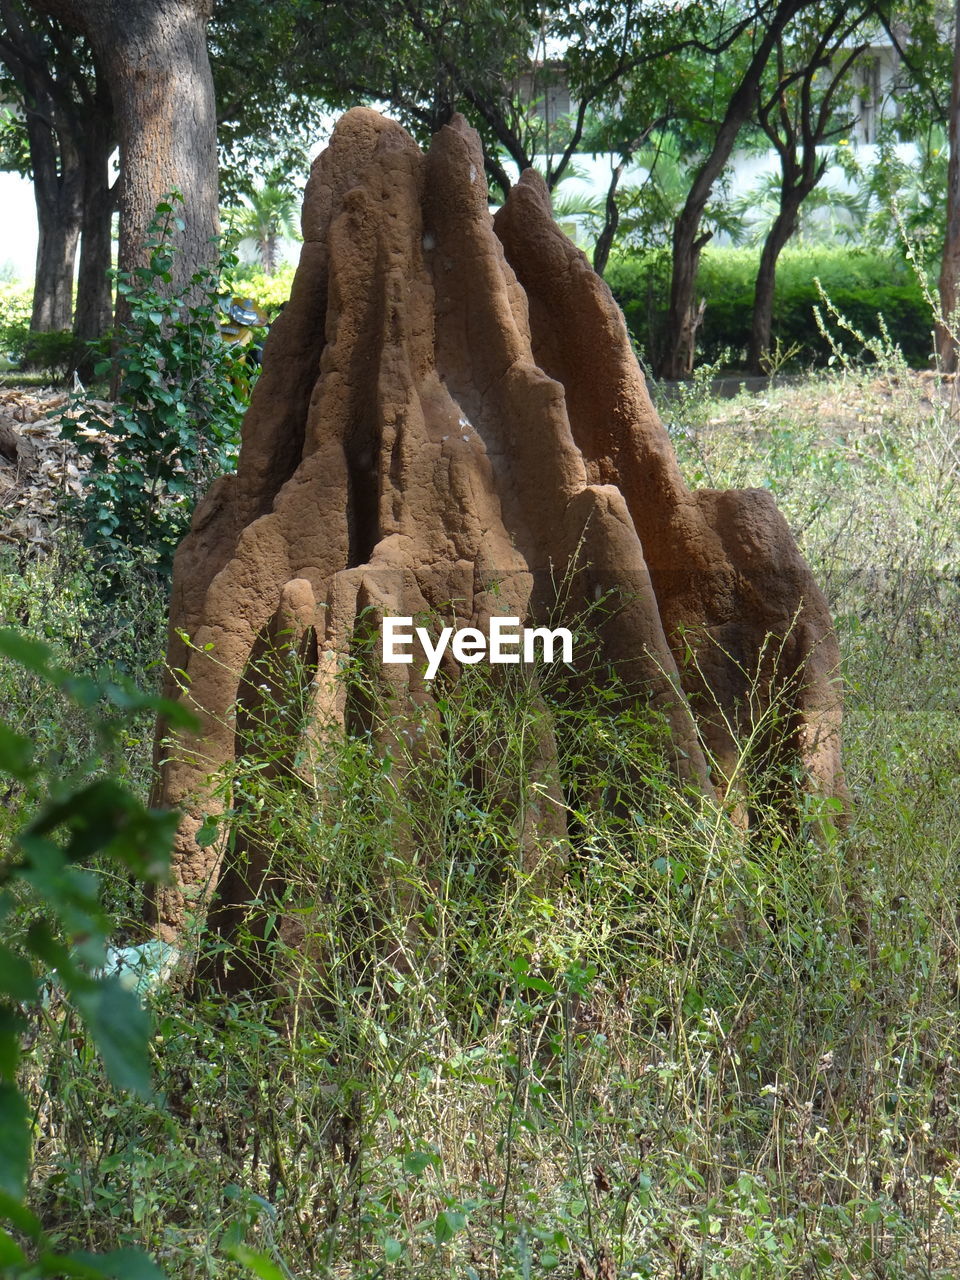 VIEW OF A TREE TRUNK